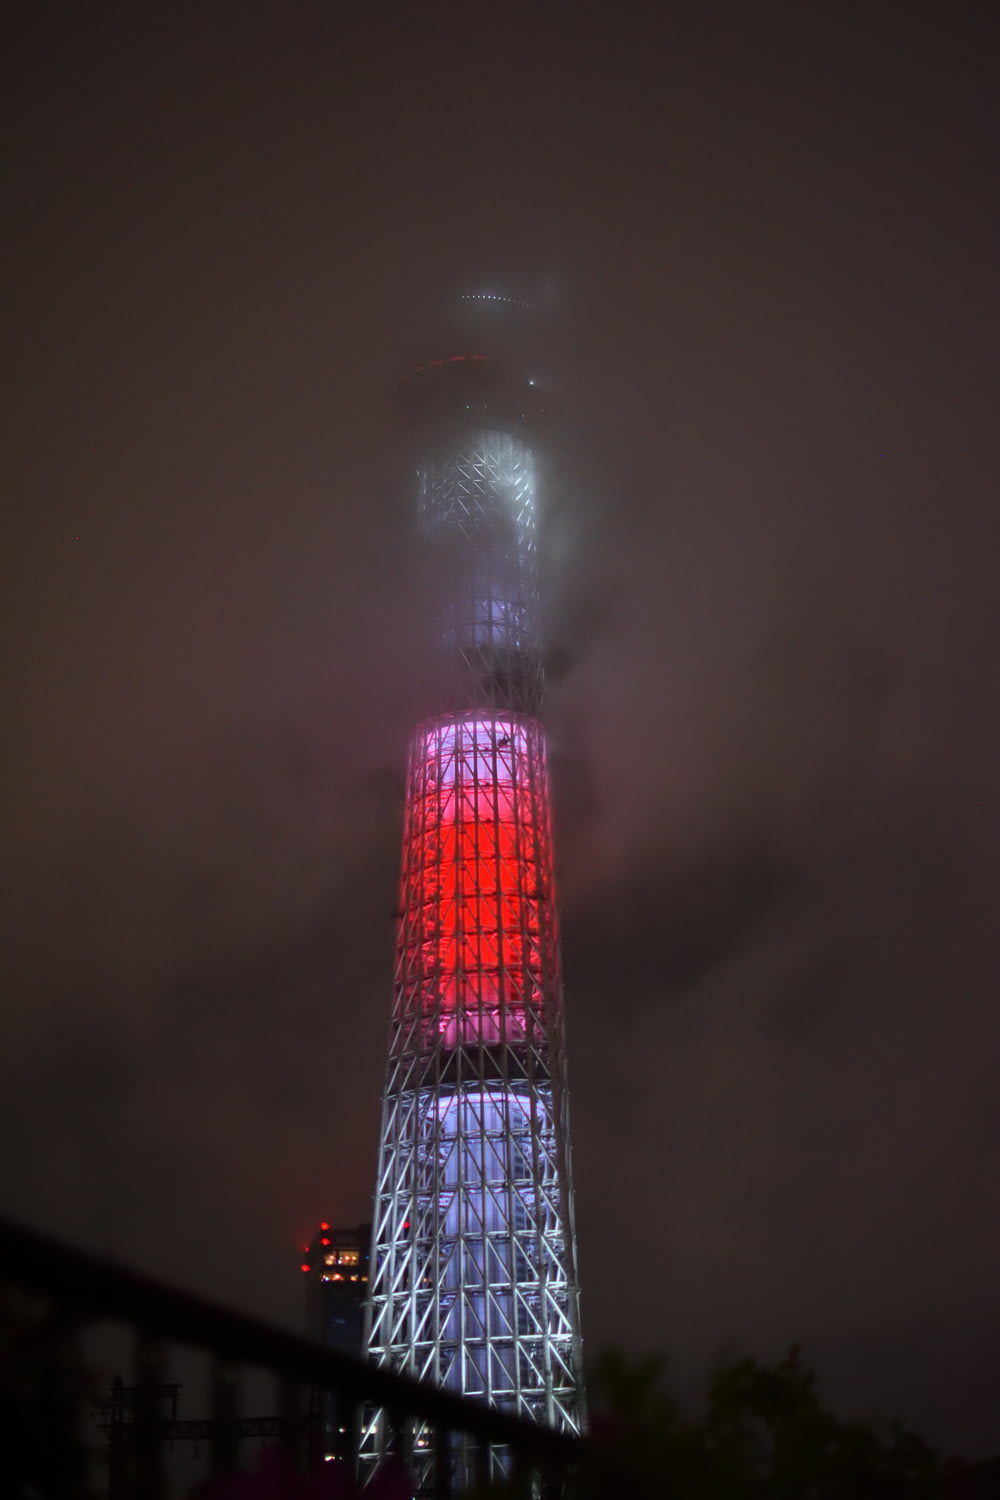 lights-on tower during nighttime